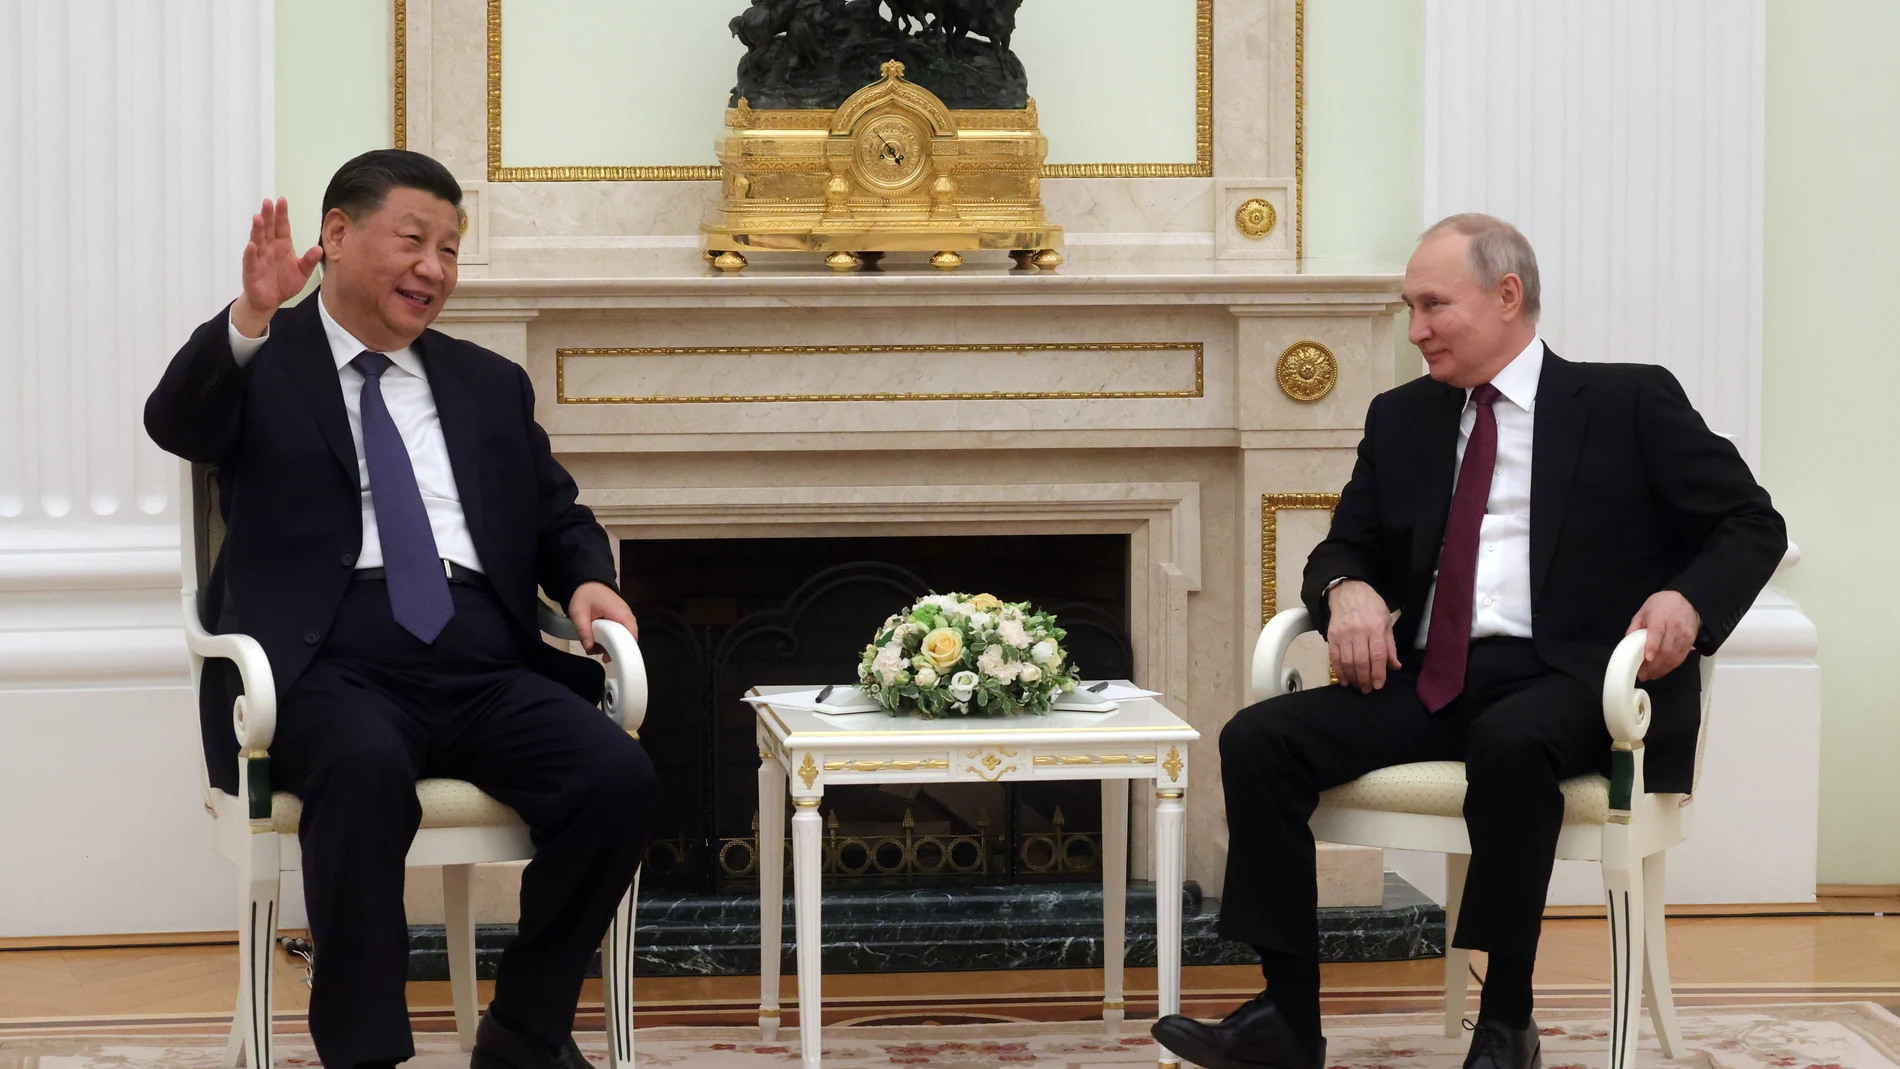 Moscow (Russian Federation), 19/03/2023.- Russian President Vladimir Putin (R) speaks with Chinese President Xi Jinping (L), during their meeting in Moscow Kremlin in Moscow, Russia, 20 March 2023. Chinese President Xi Jinping arrived in Moscow on a three-day visit, which will last from March 20 to 22, according to Russian and Chinese state agencies. Xi Jinping visits Russia on improving joint partnership and developing key areas of Russian-Chinese economic cooperation. (Rusia, Moscú) EFE/EPA/SERGEI KARPUHIN / SPUTNIK / KREMLIN POOL MANDATORY CREDIT 